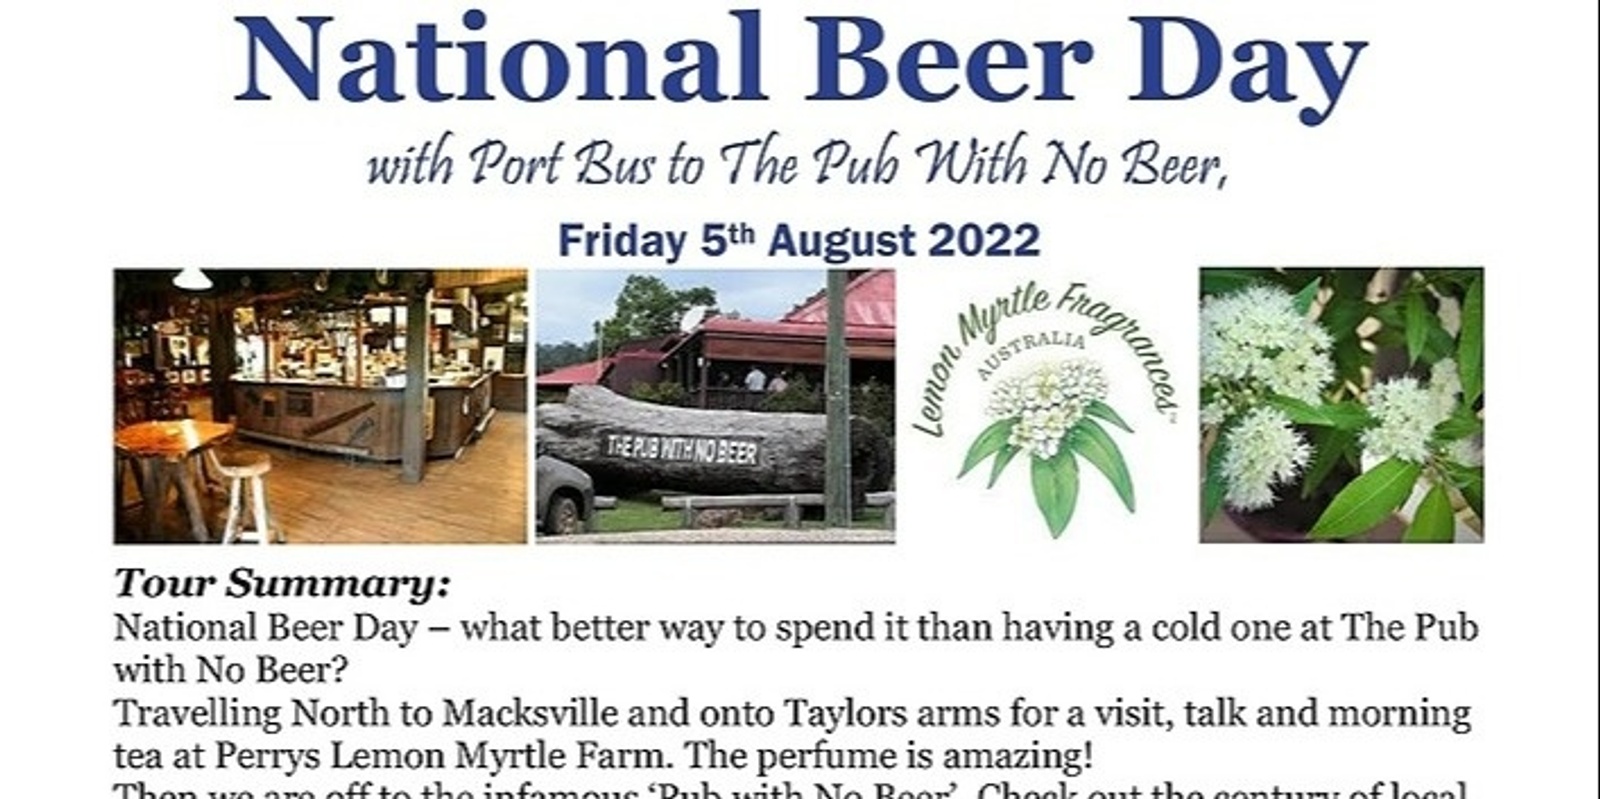 Banner image for National Beer Day to The Pub With No Beer